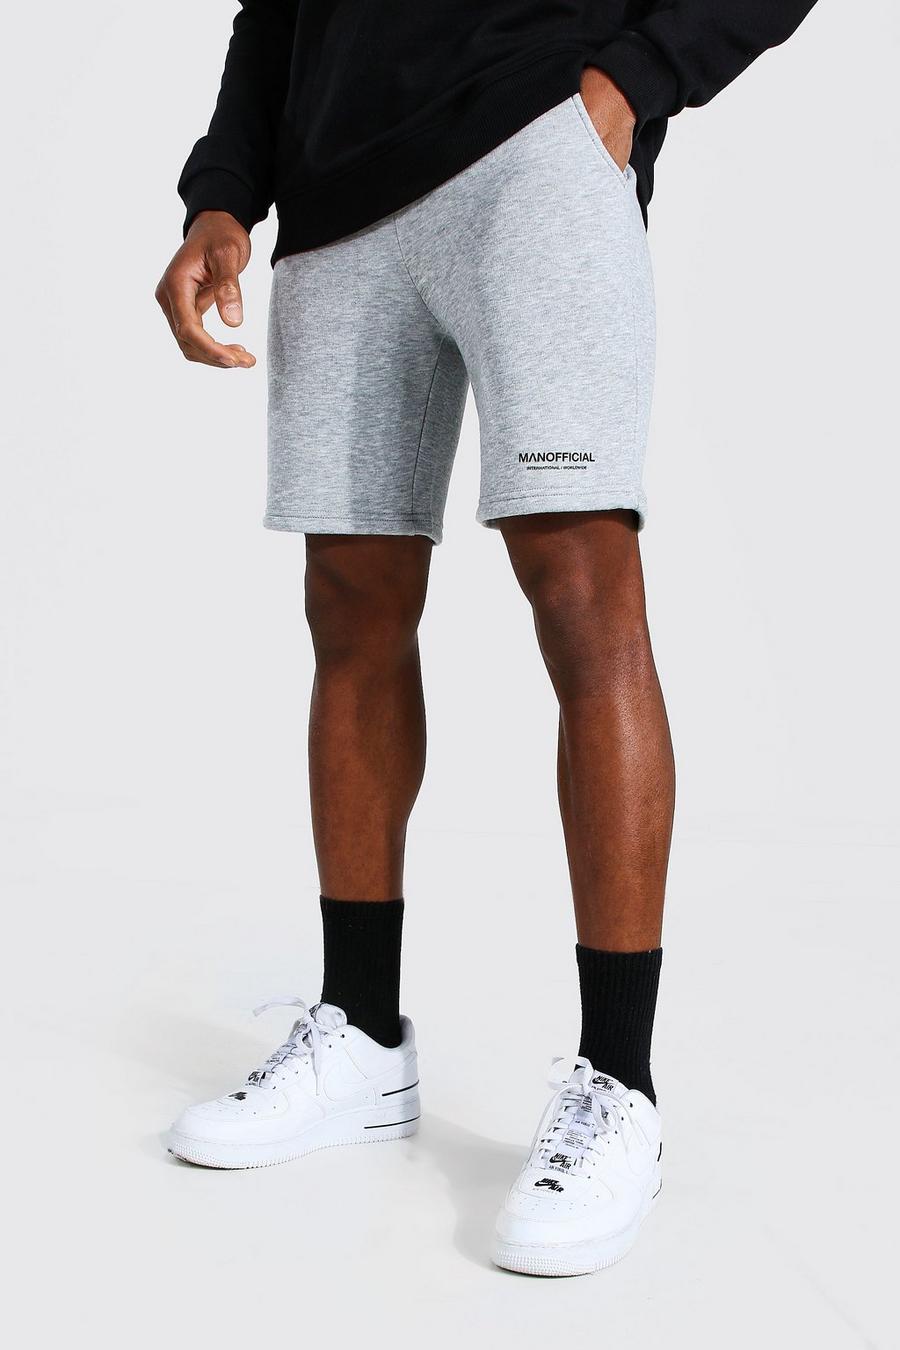 Grey marl Man Official Waistband Slim Mid Jersey Short image number 1